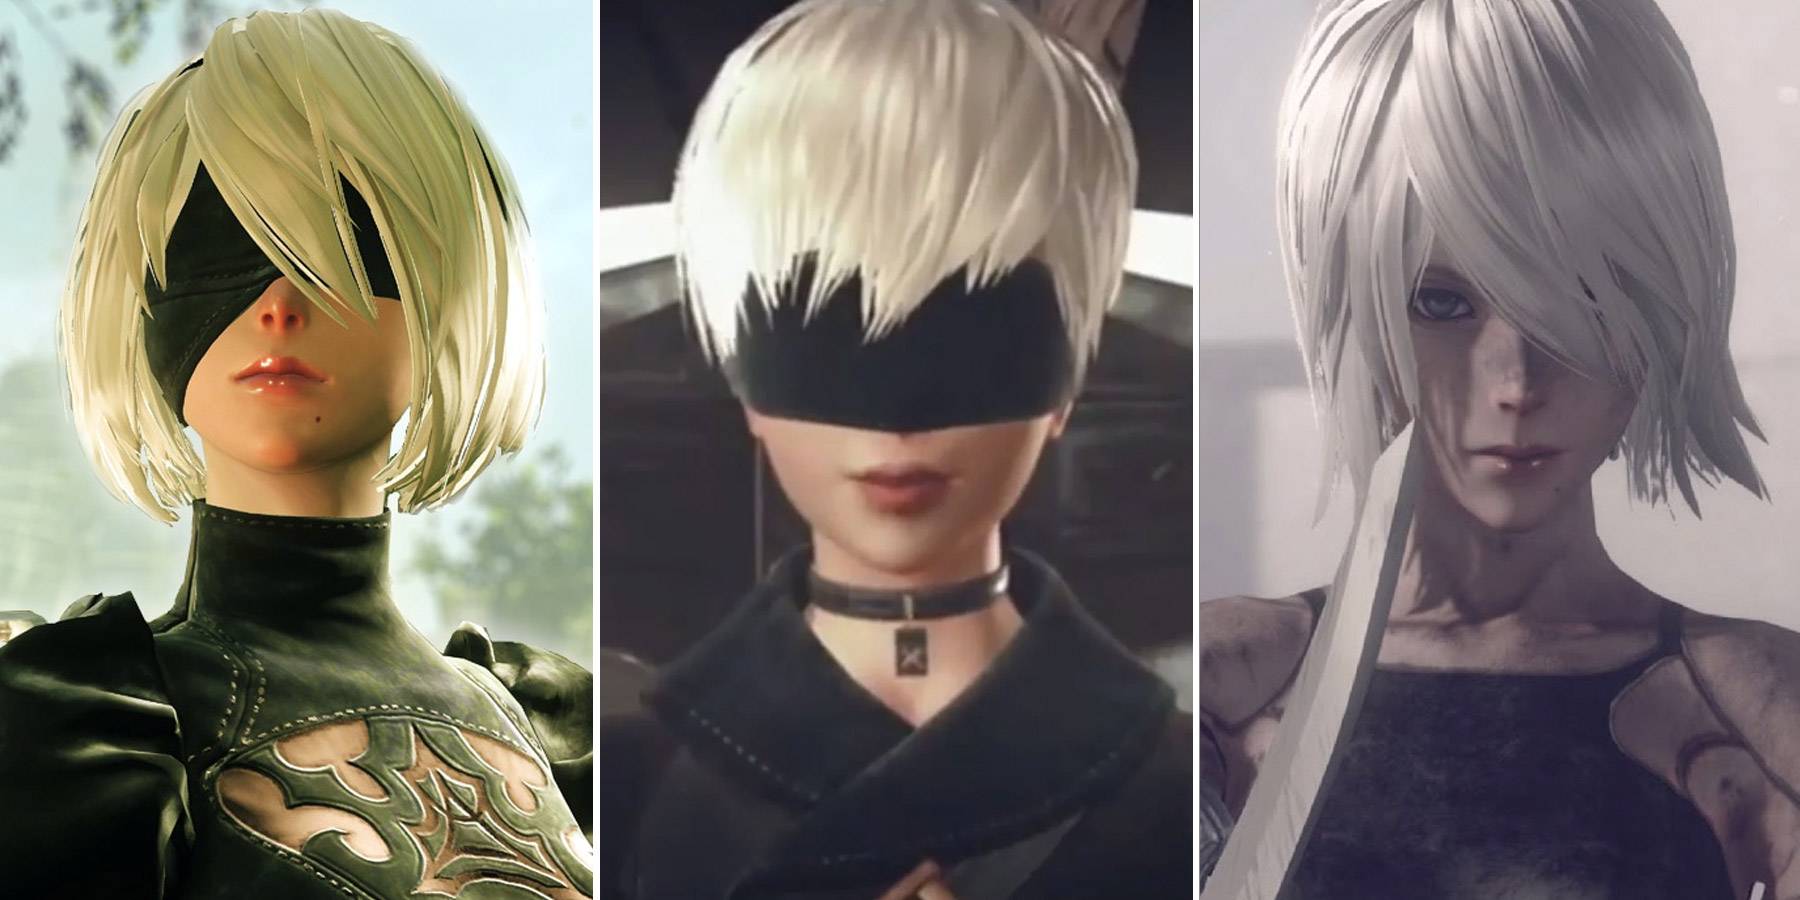 2b and 9s have a new objective